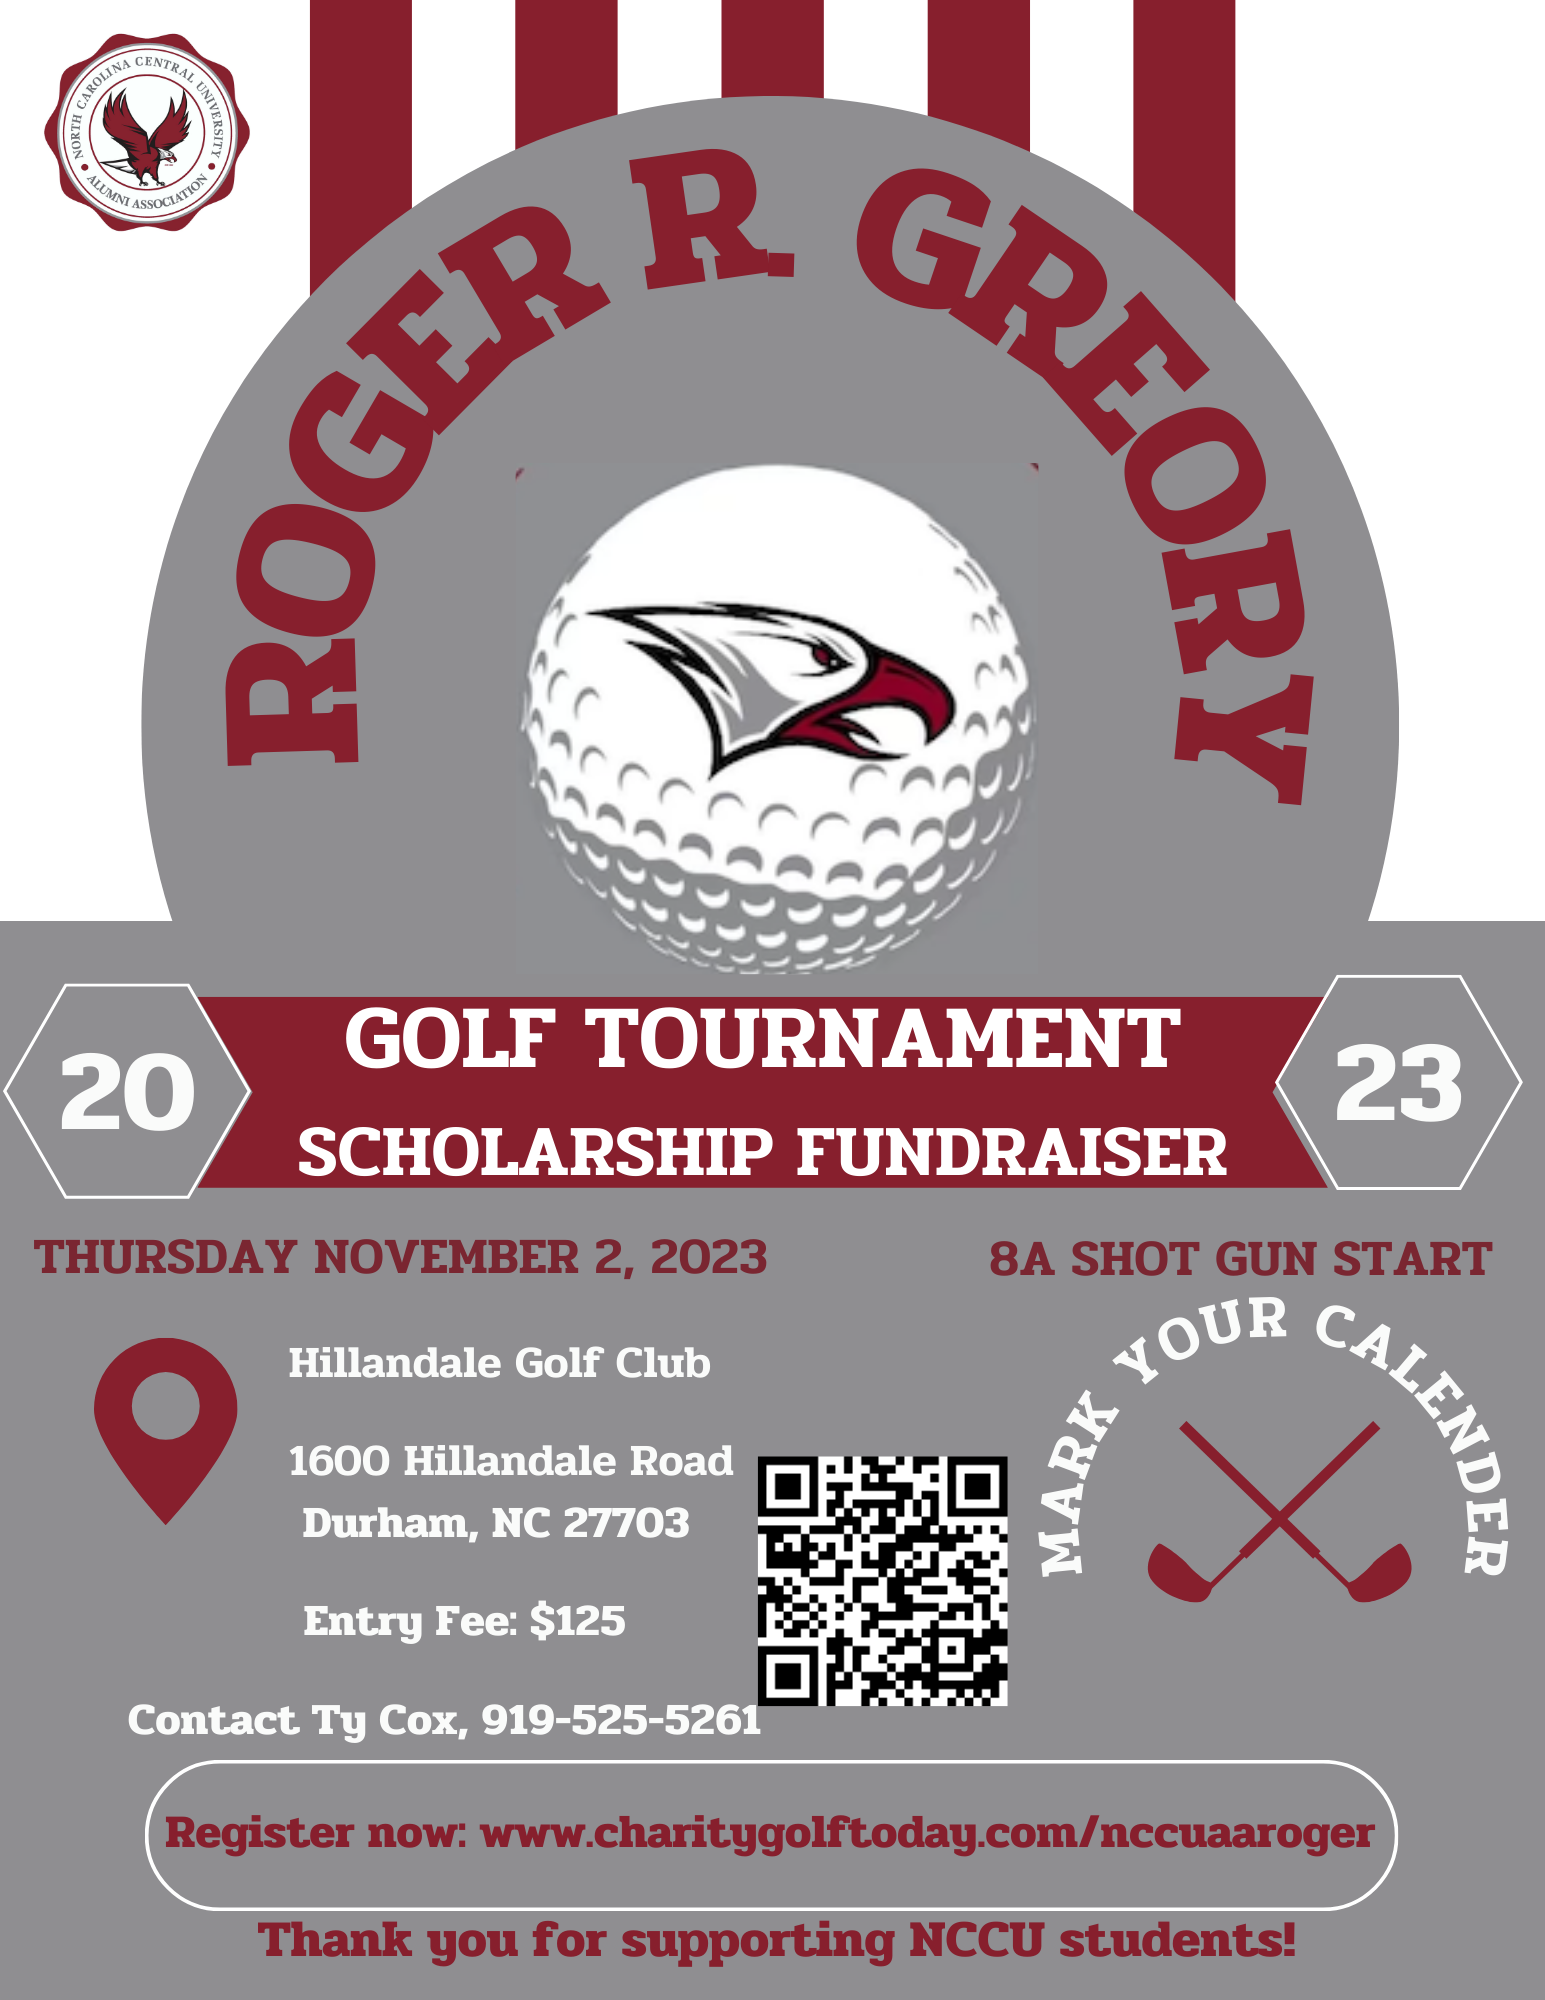 NCCUAA Roger R. Gregory Scholarship Annual Golf Tournament